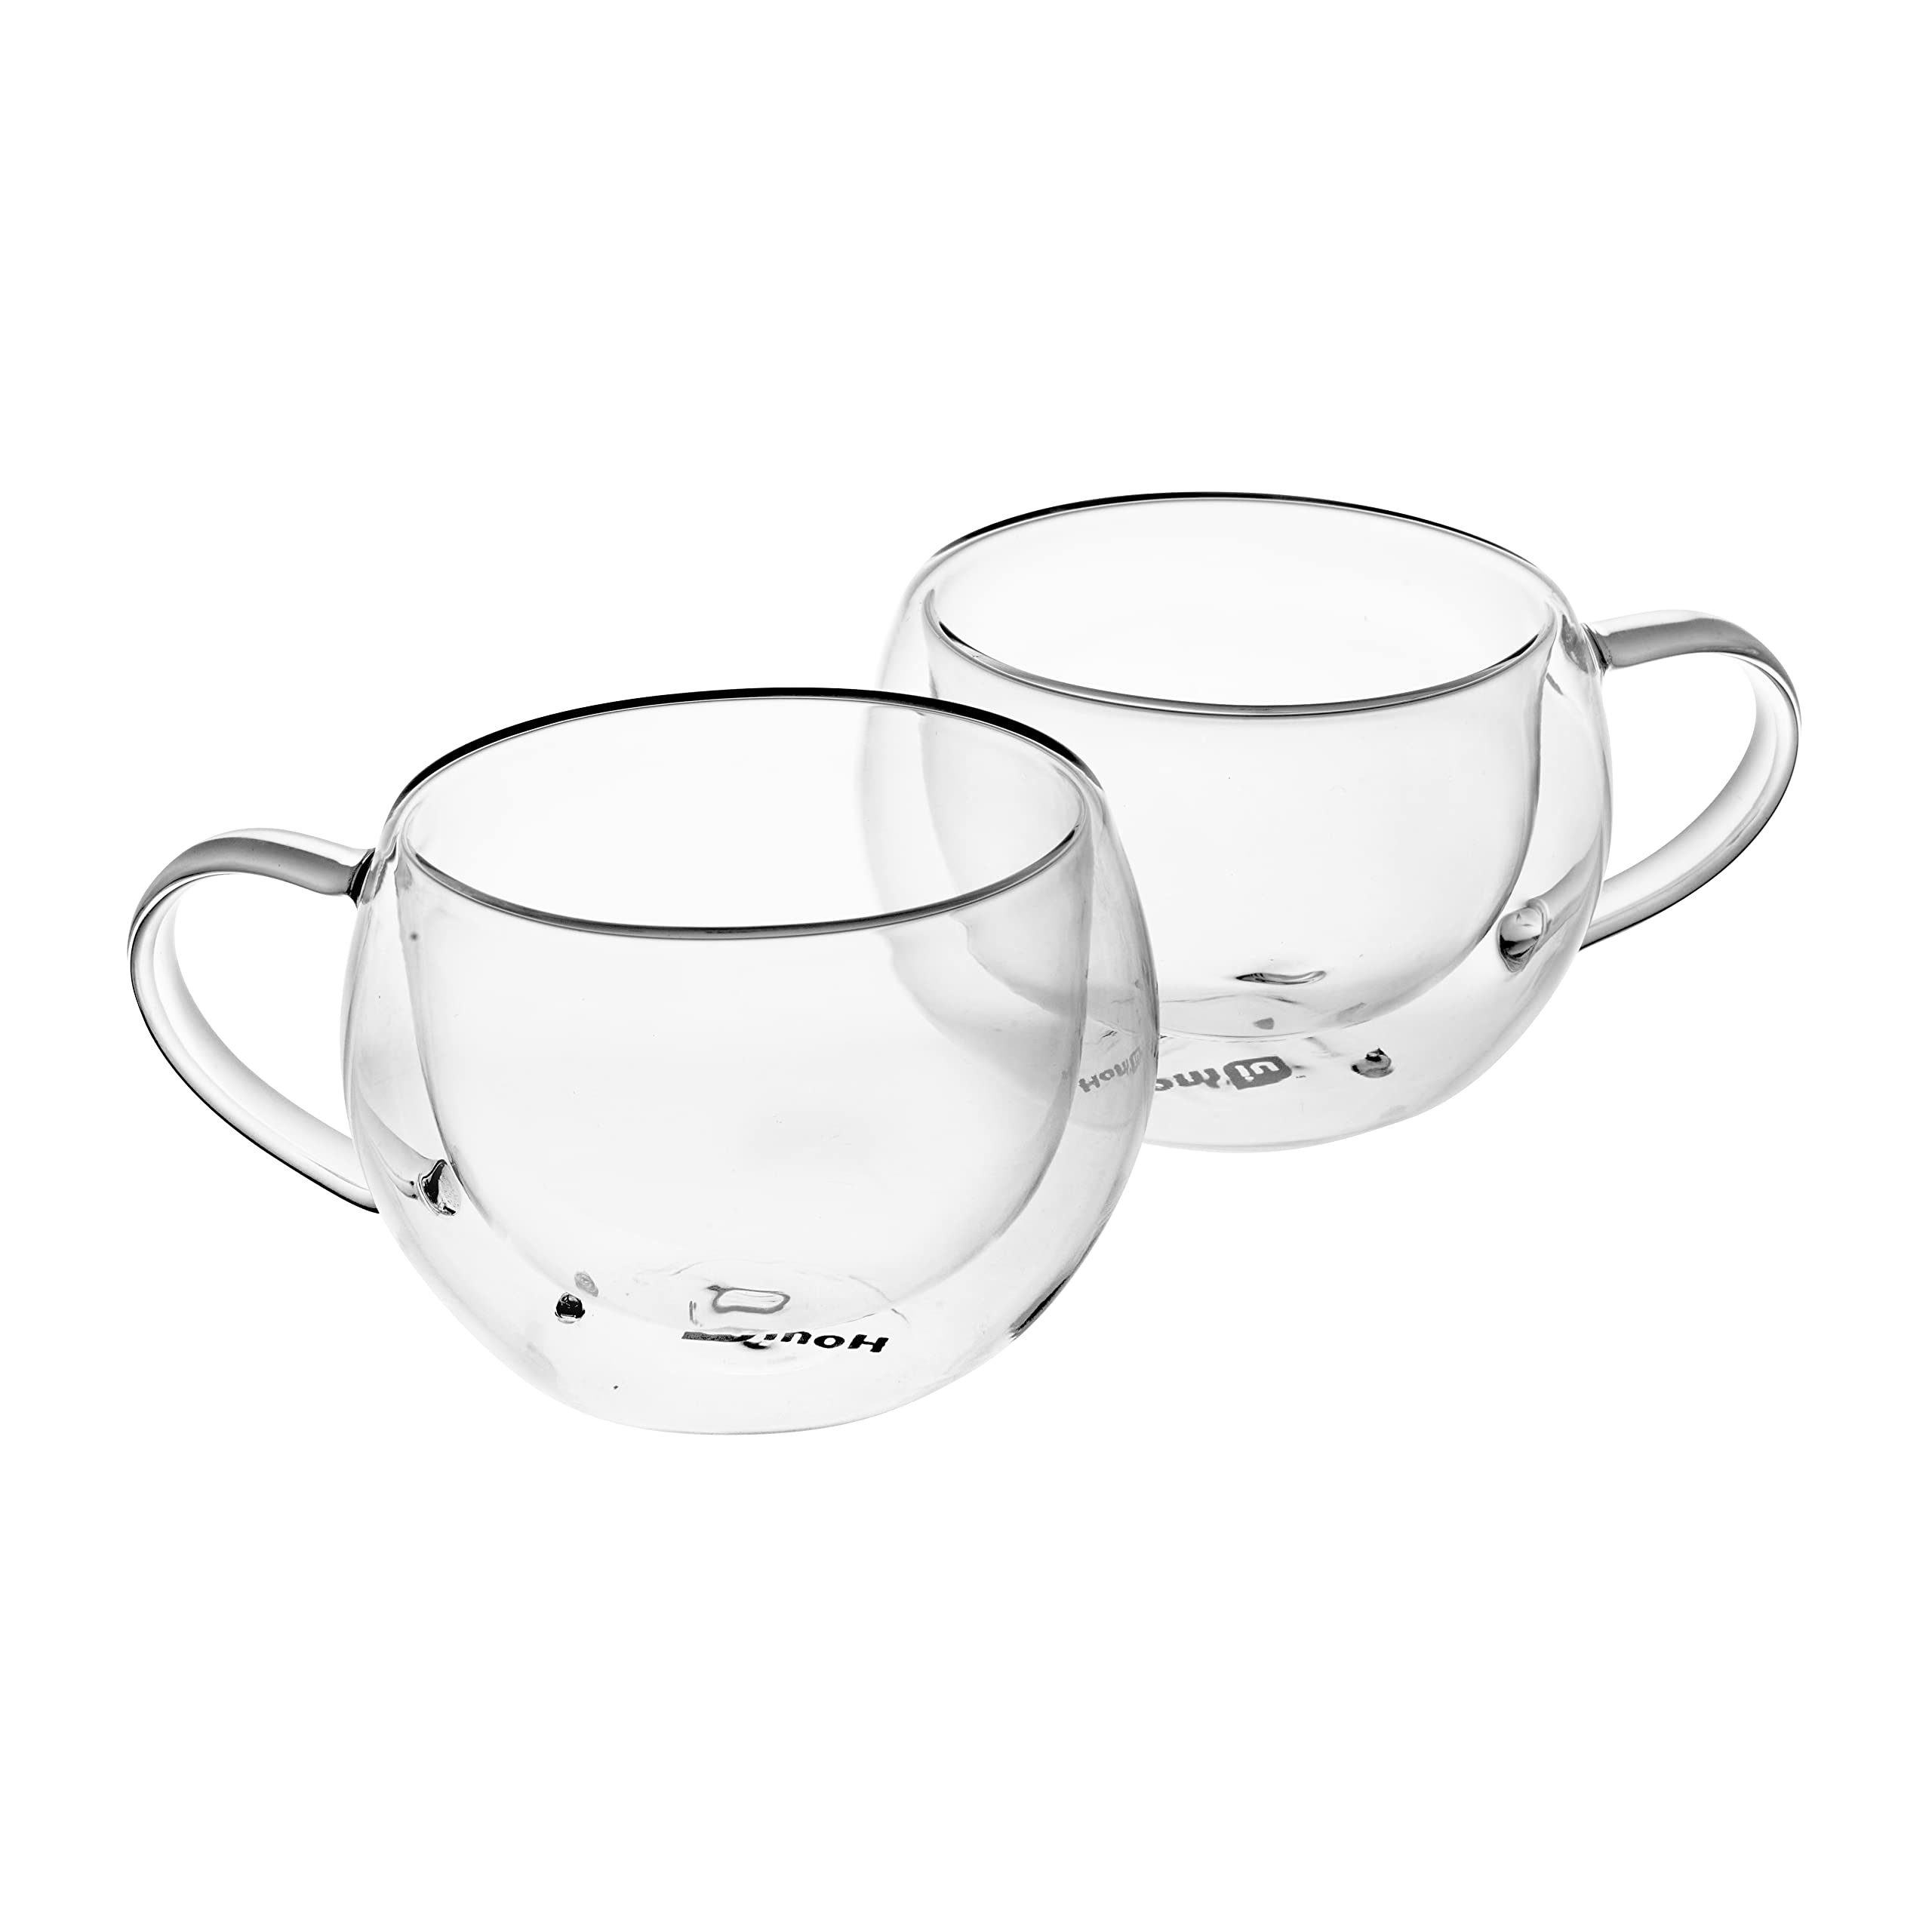 Homiu Double Walled Thermo Glass Cups Perfect for Tea Coffee Borosilicate Glasses Pack of 2 (Tea Cups 6.1oz)